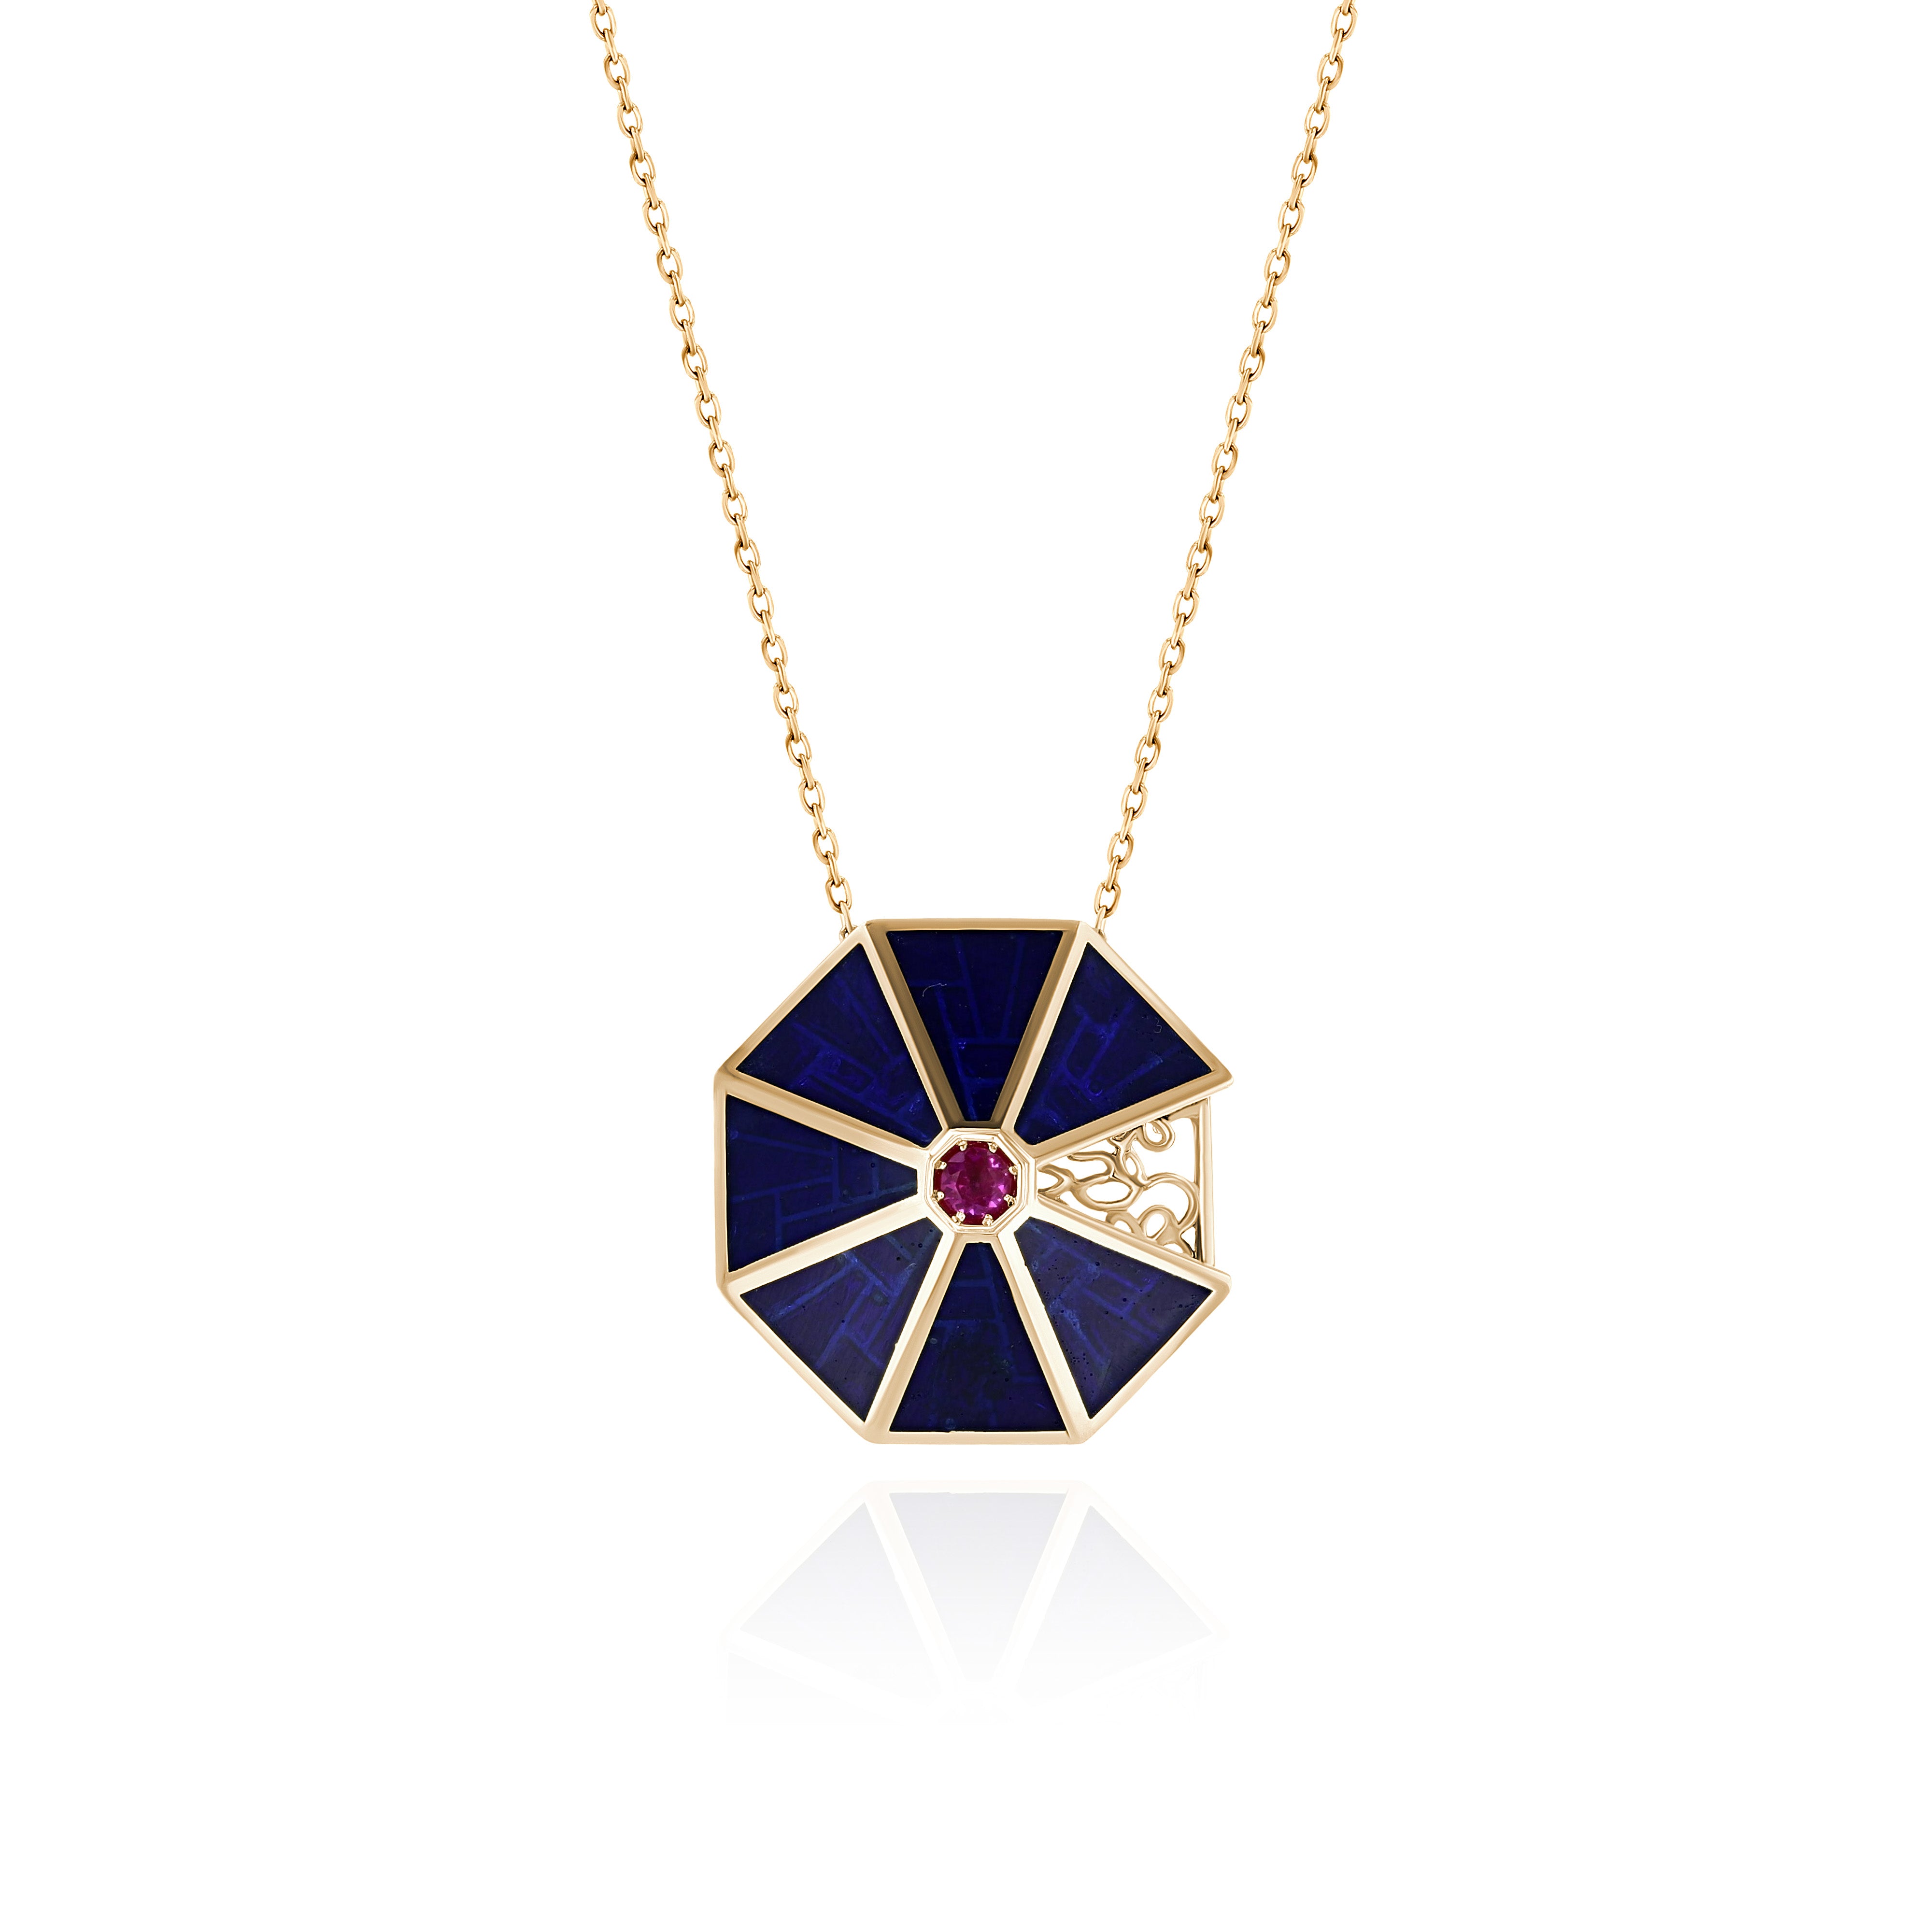 Yellow Gold octagon Necklace with Dark Blue Cloisonne and Ruby, Medium